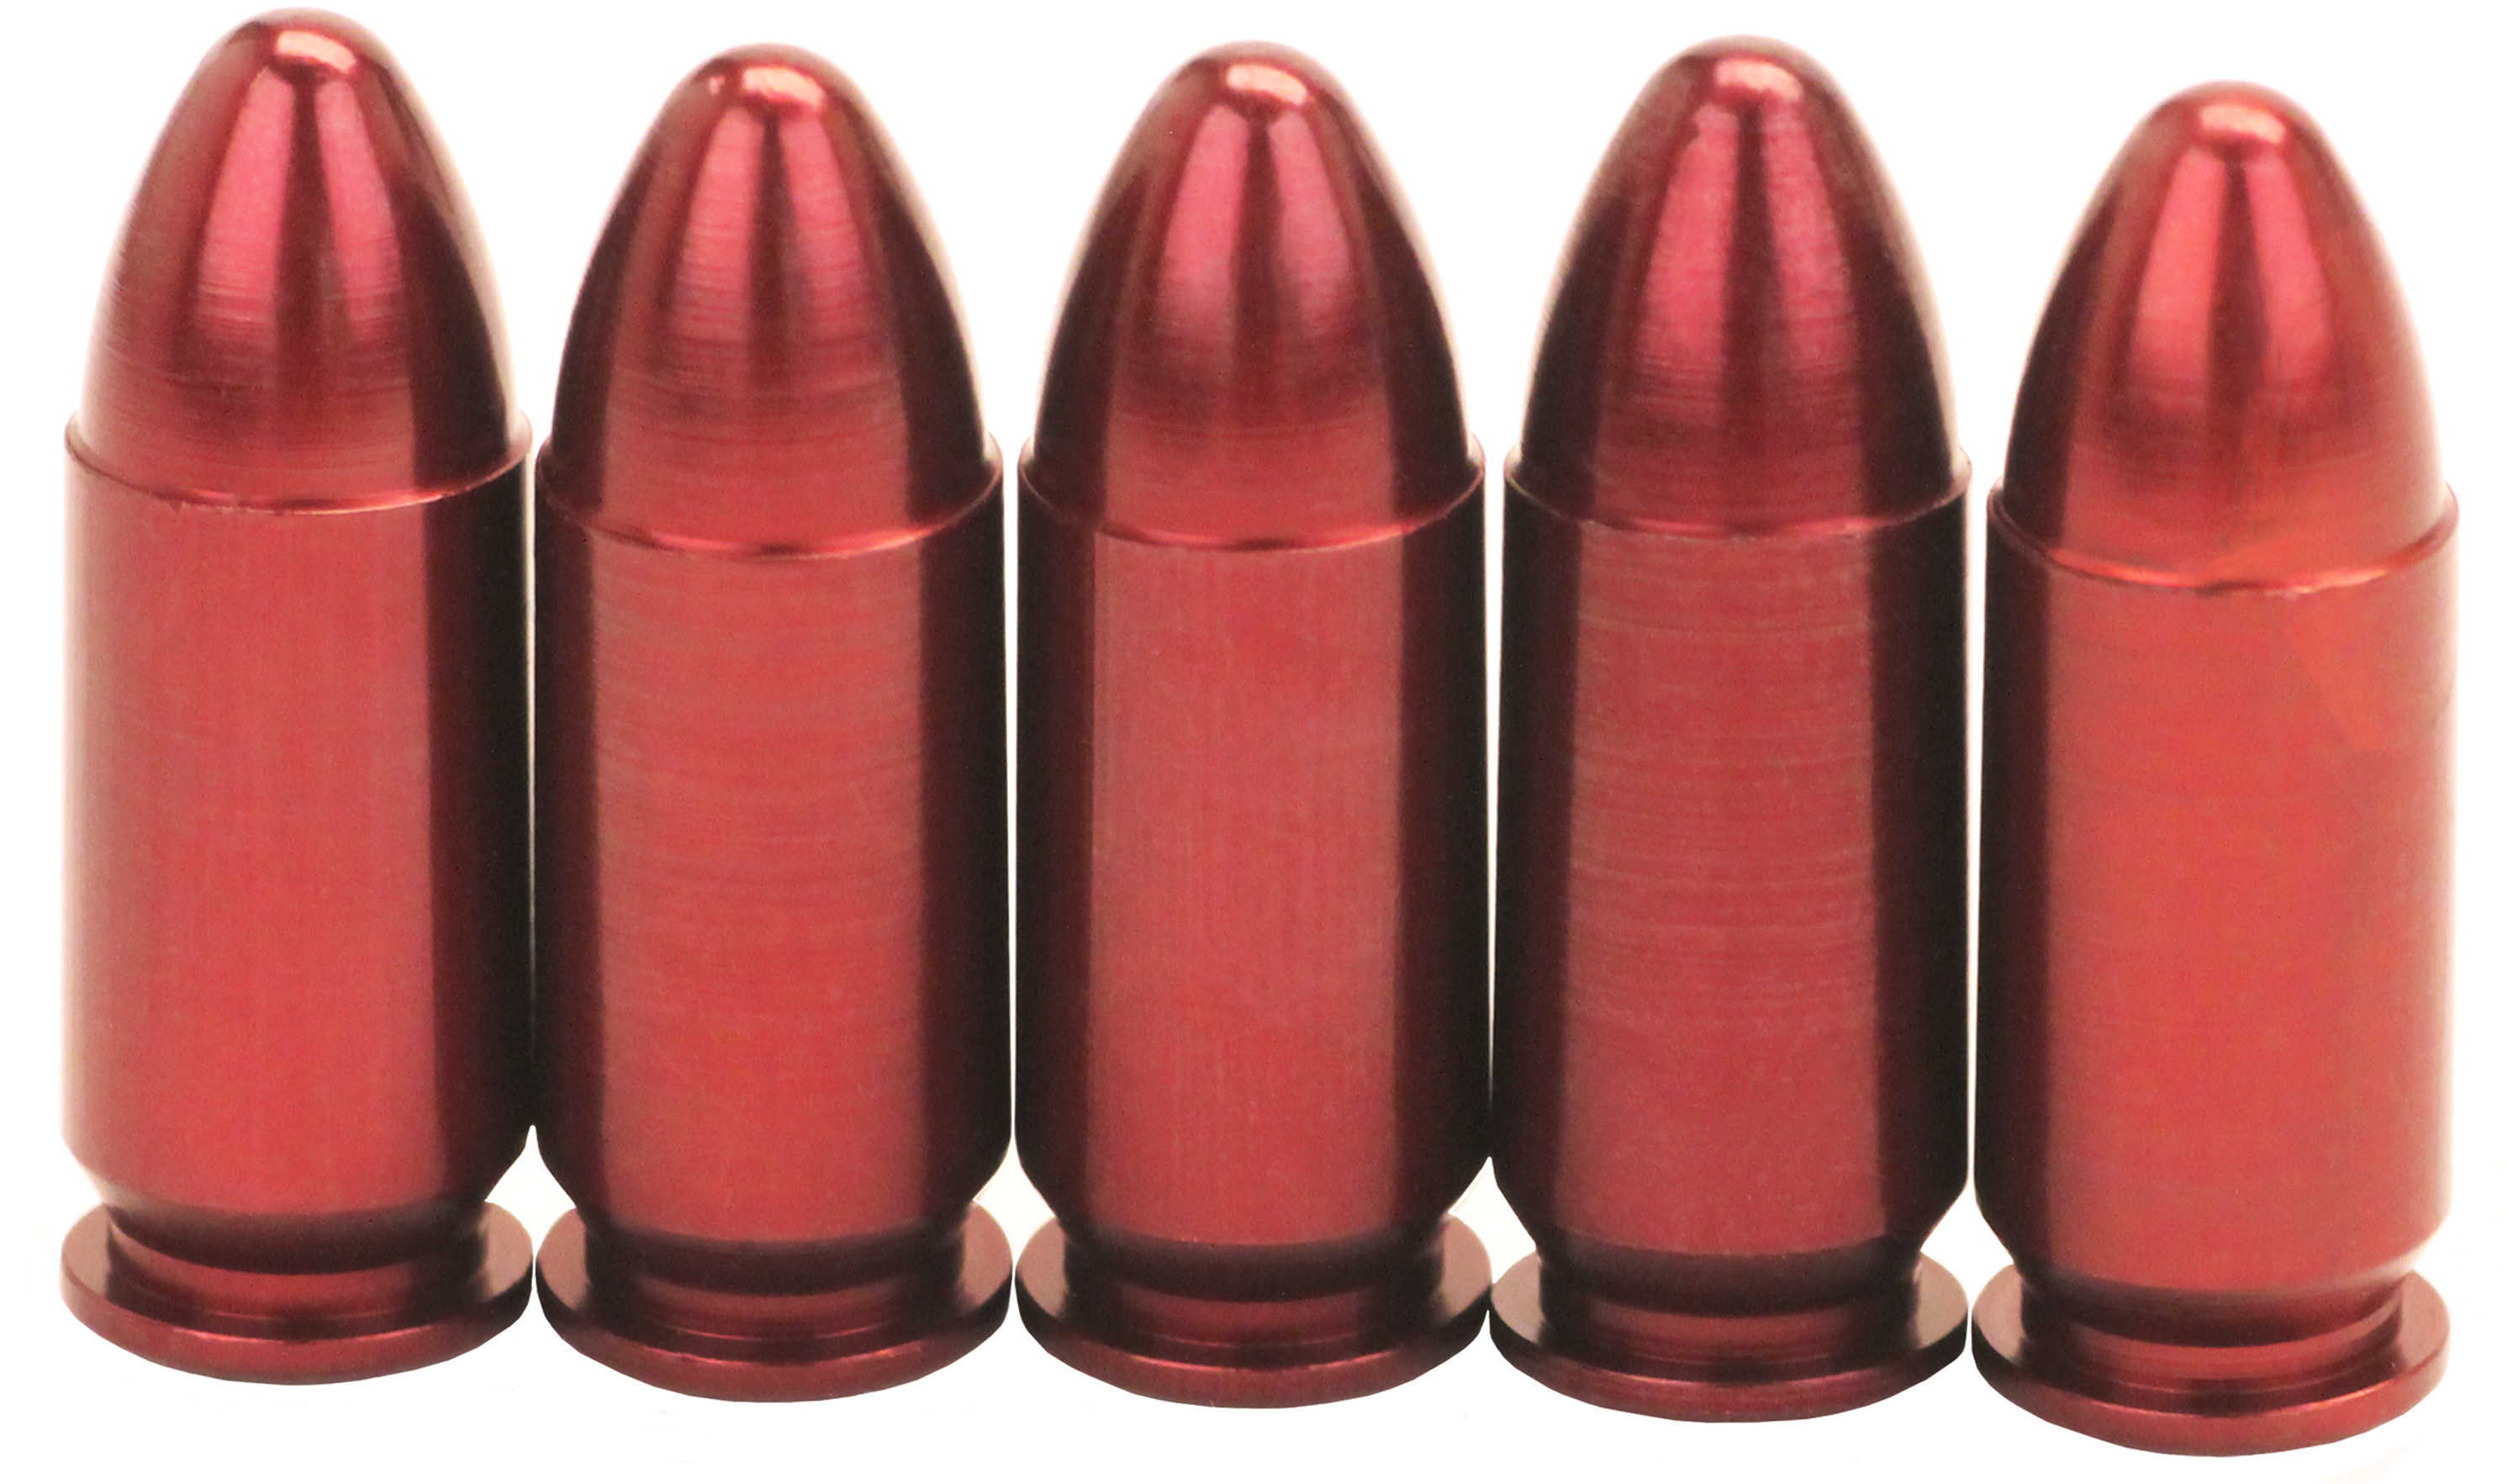 A-Zoom Precision Metal Snap Caps 9mm Luger, 5 Per Pack For Safety Training, Function Testing Or safely decocking Without